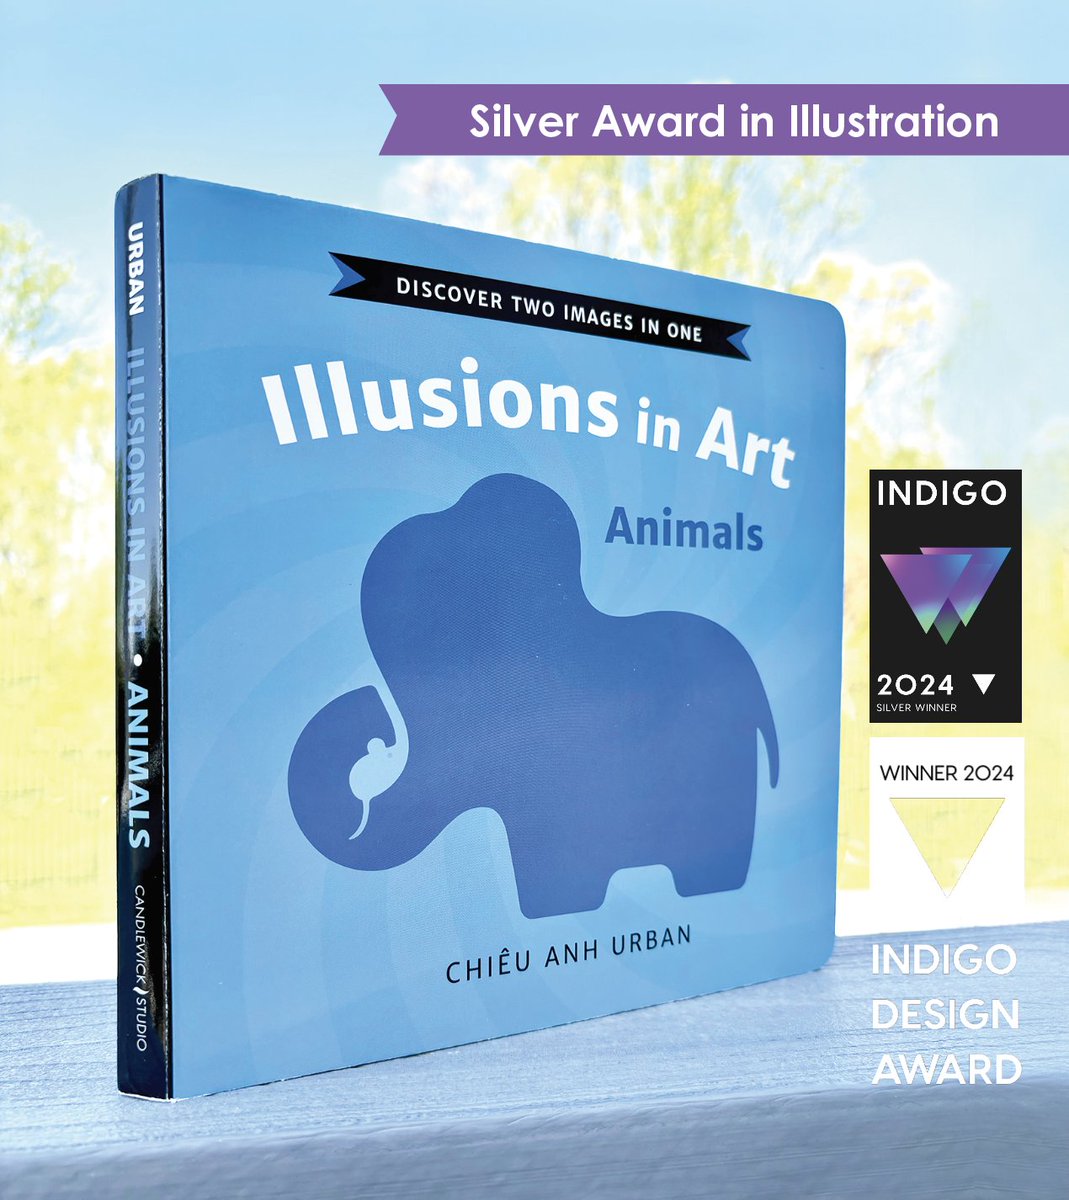 Congrats to @ChieuAnhUrban for winning a Silver Award for Graphic Book Design Illustration!